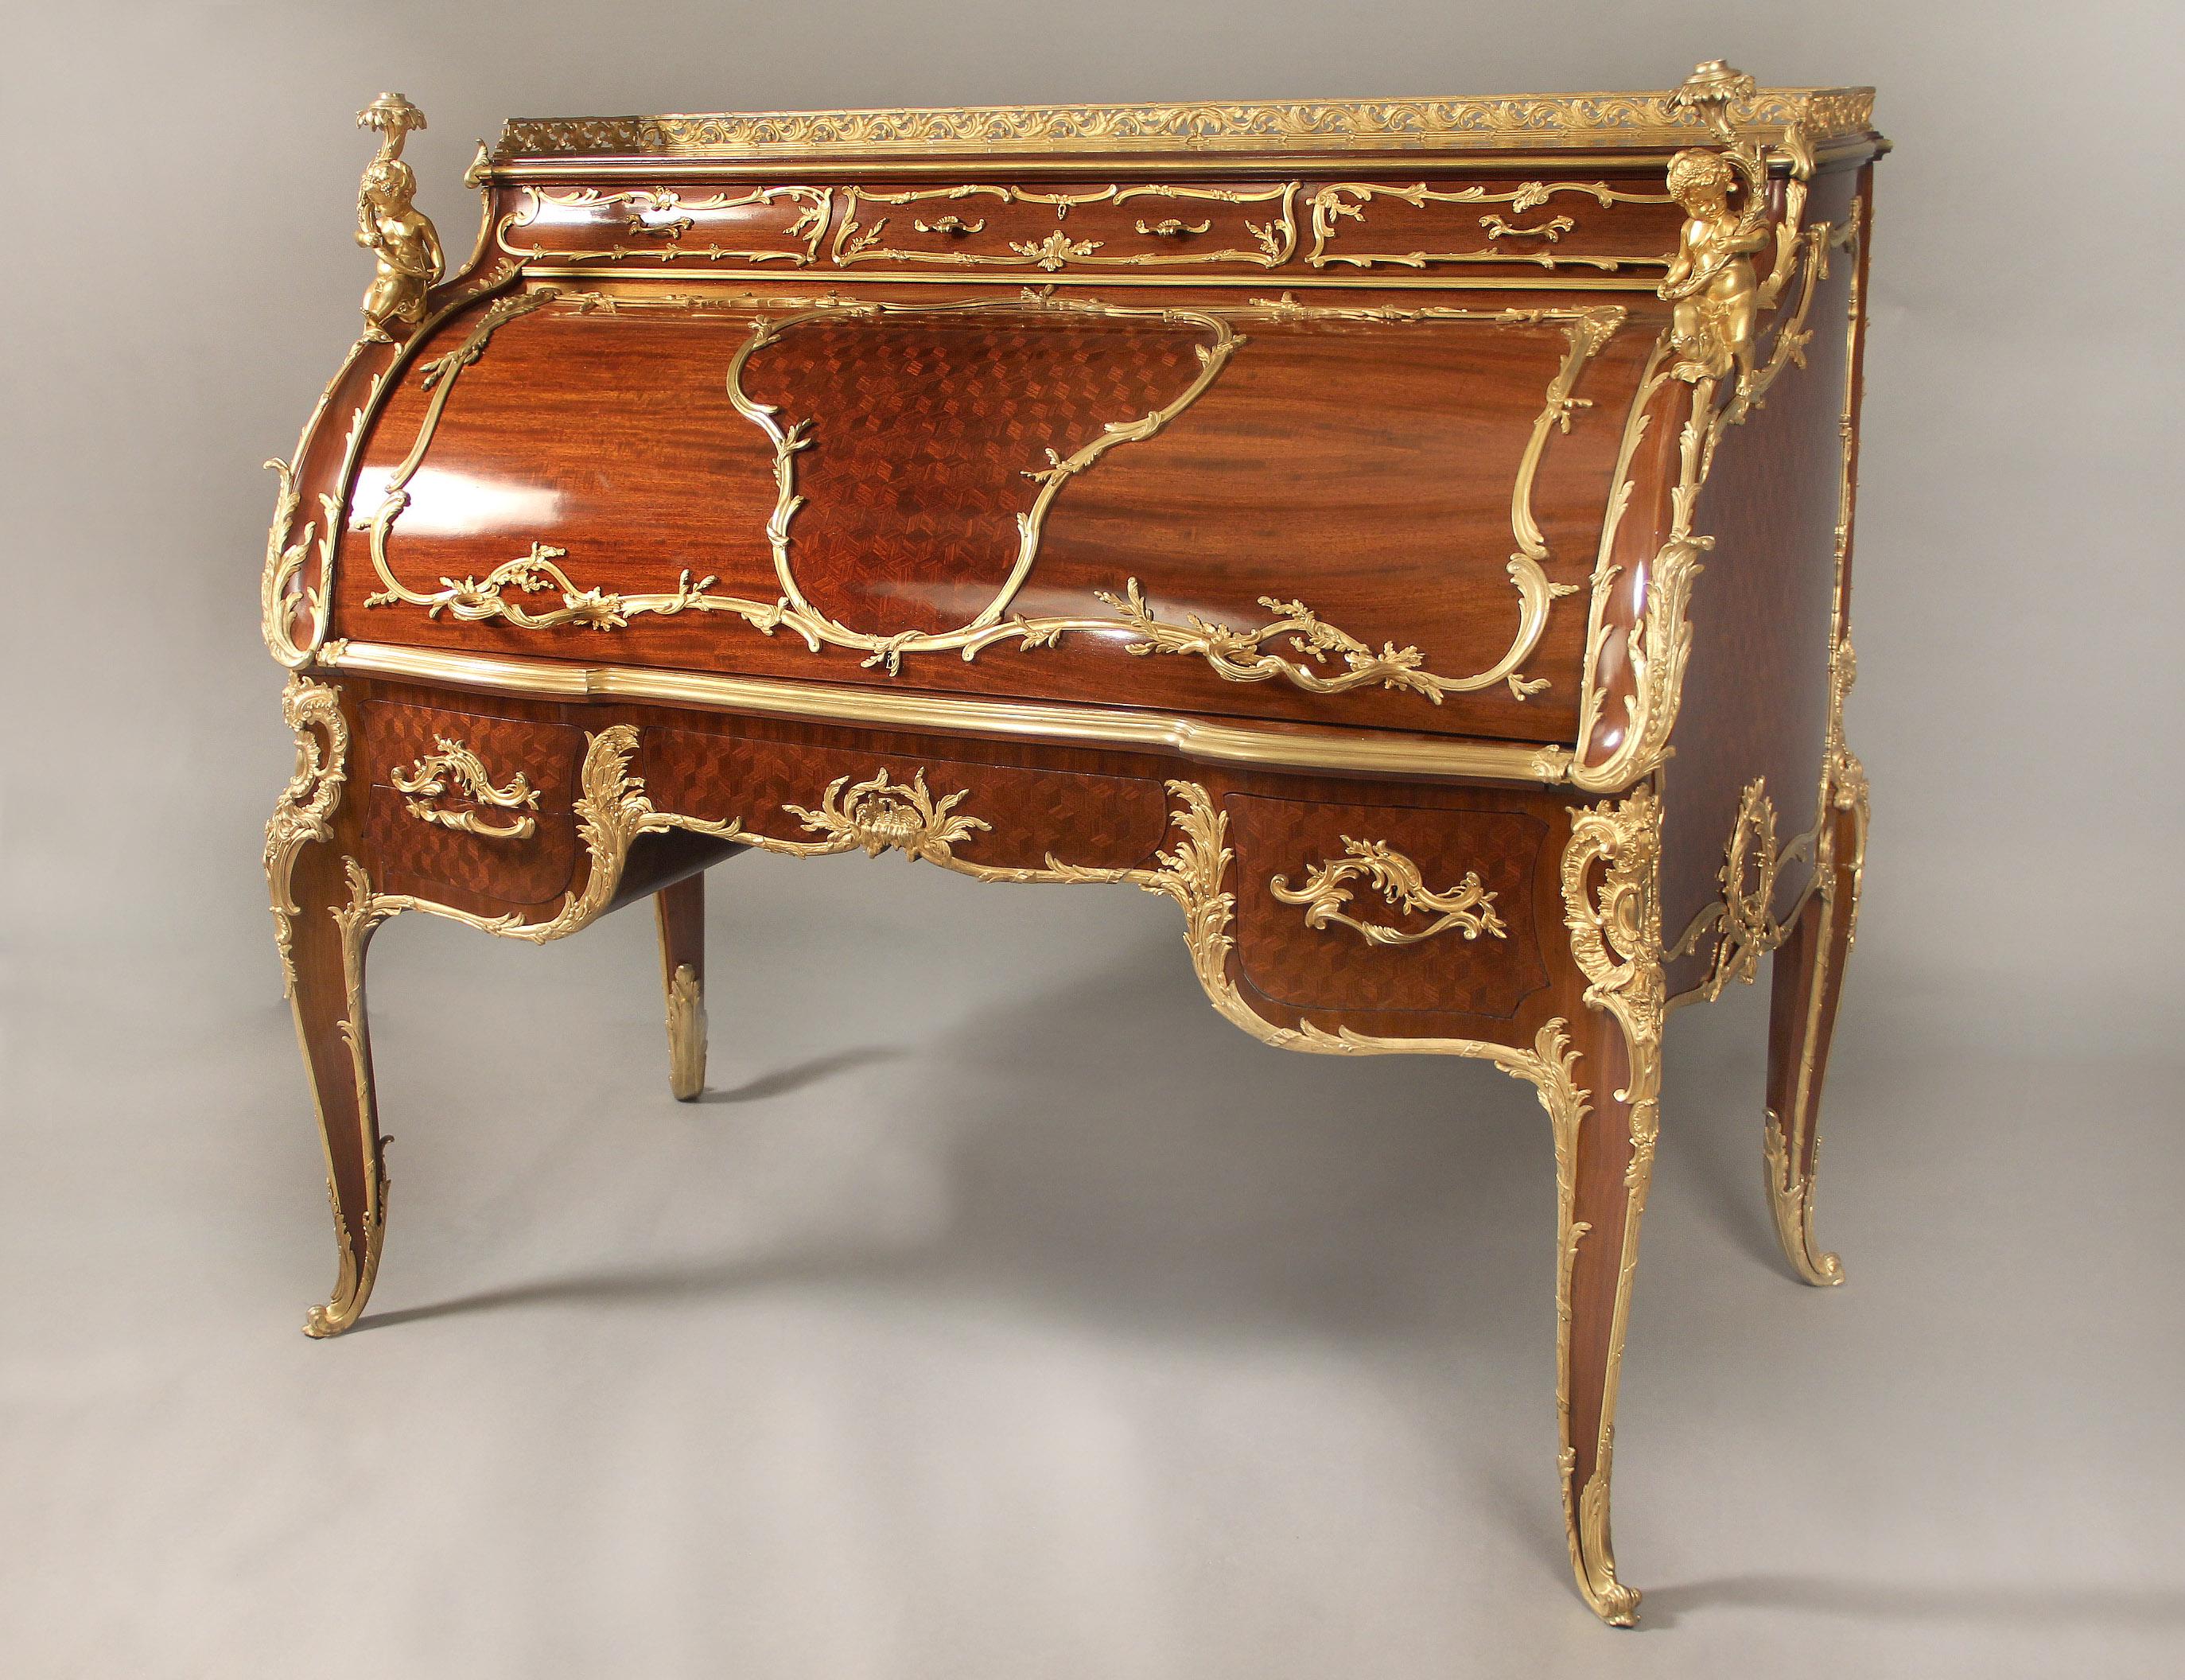 A very special and Palatial early 20th century Louis XV style gilt bronze mounted Mahogany and Bois Satine Parquetry Bureau a Cylindre by François Linke

François Linke – Index Number 242

Surmounted by a pierced guilloche acanthus gallery above